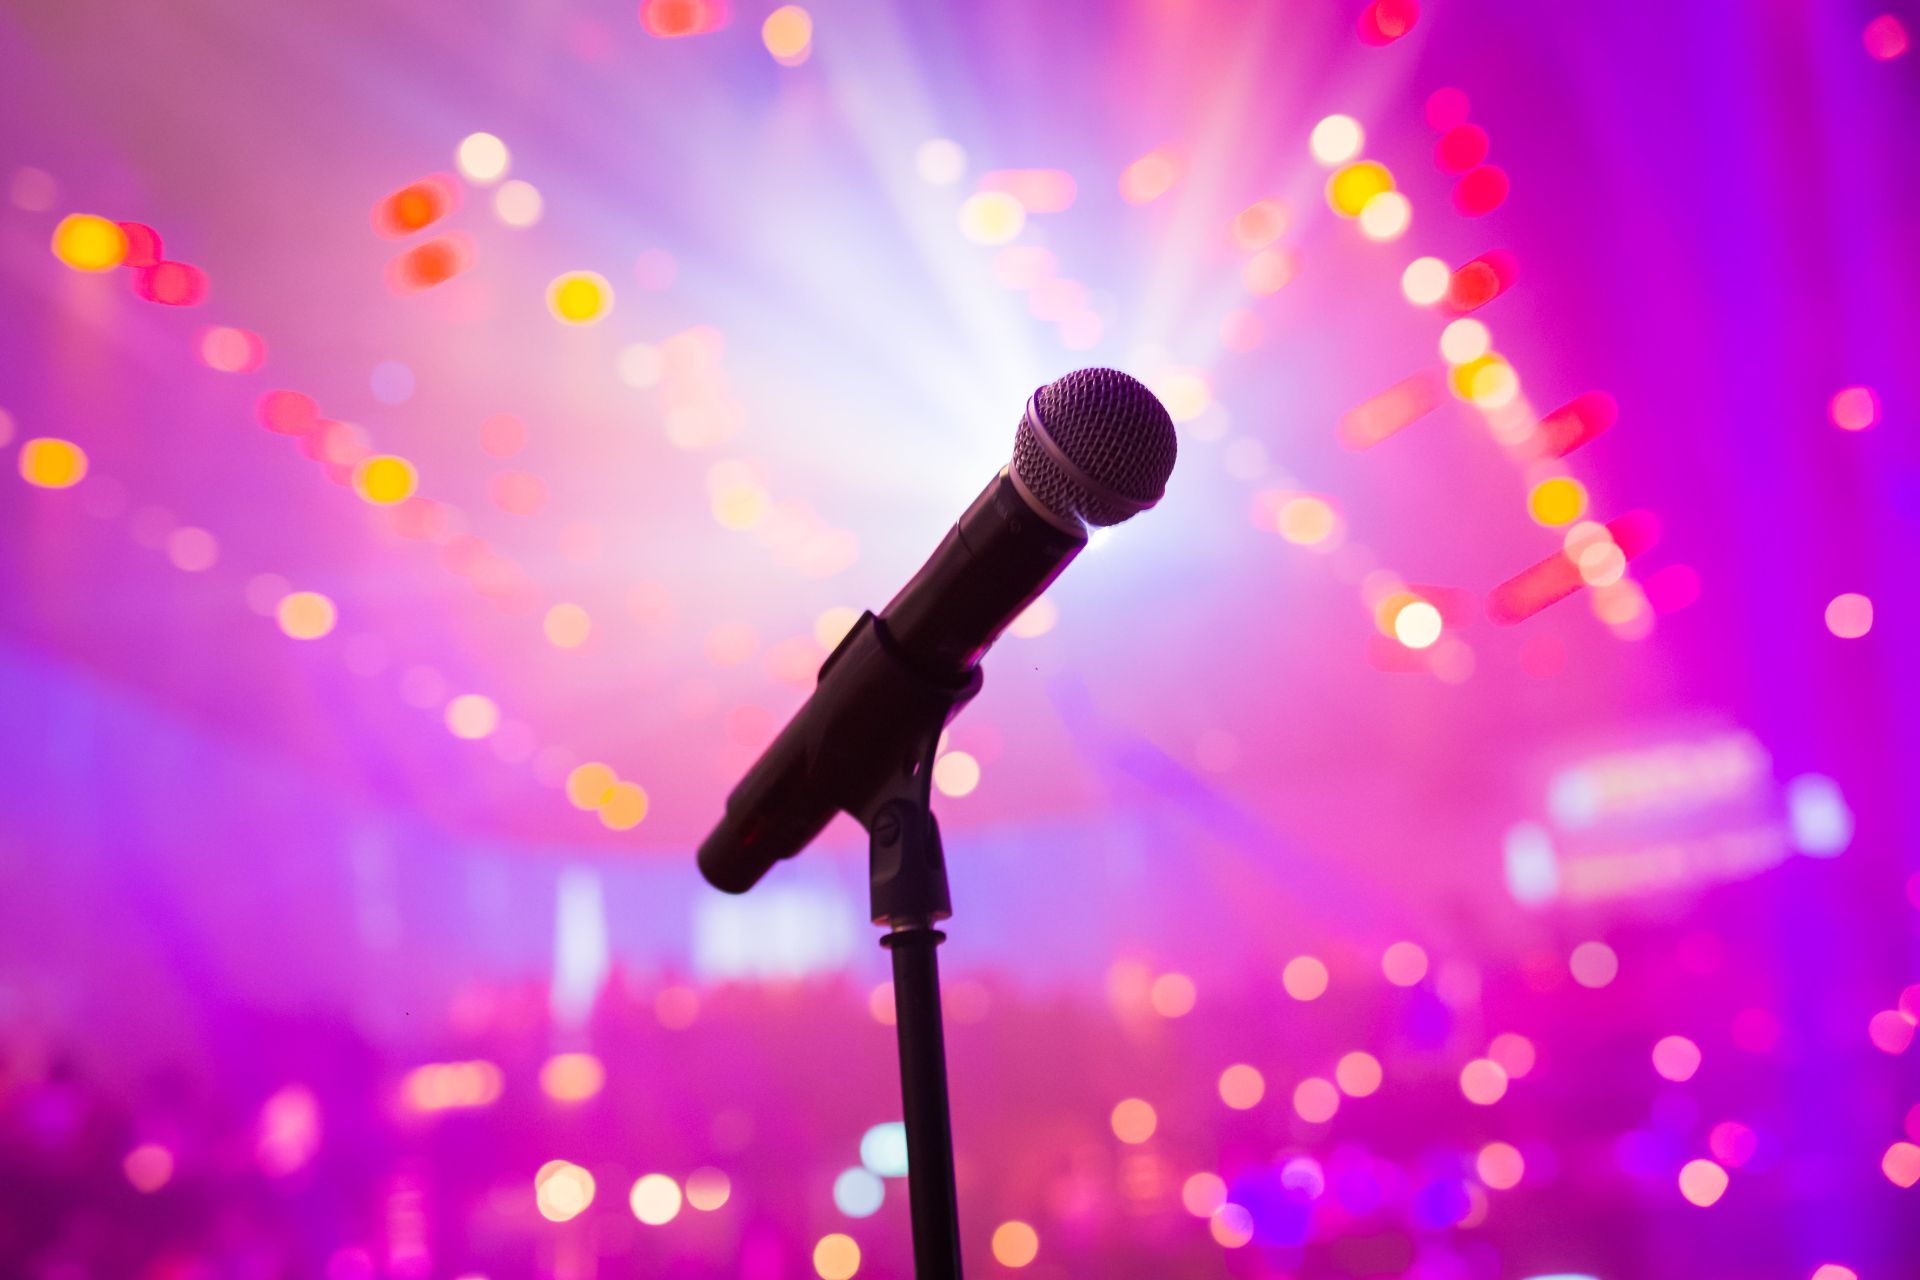 Selective Focus Photo of a Microphone Near Pink Lights